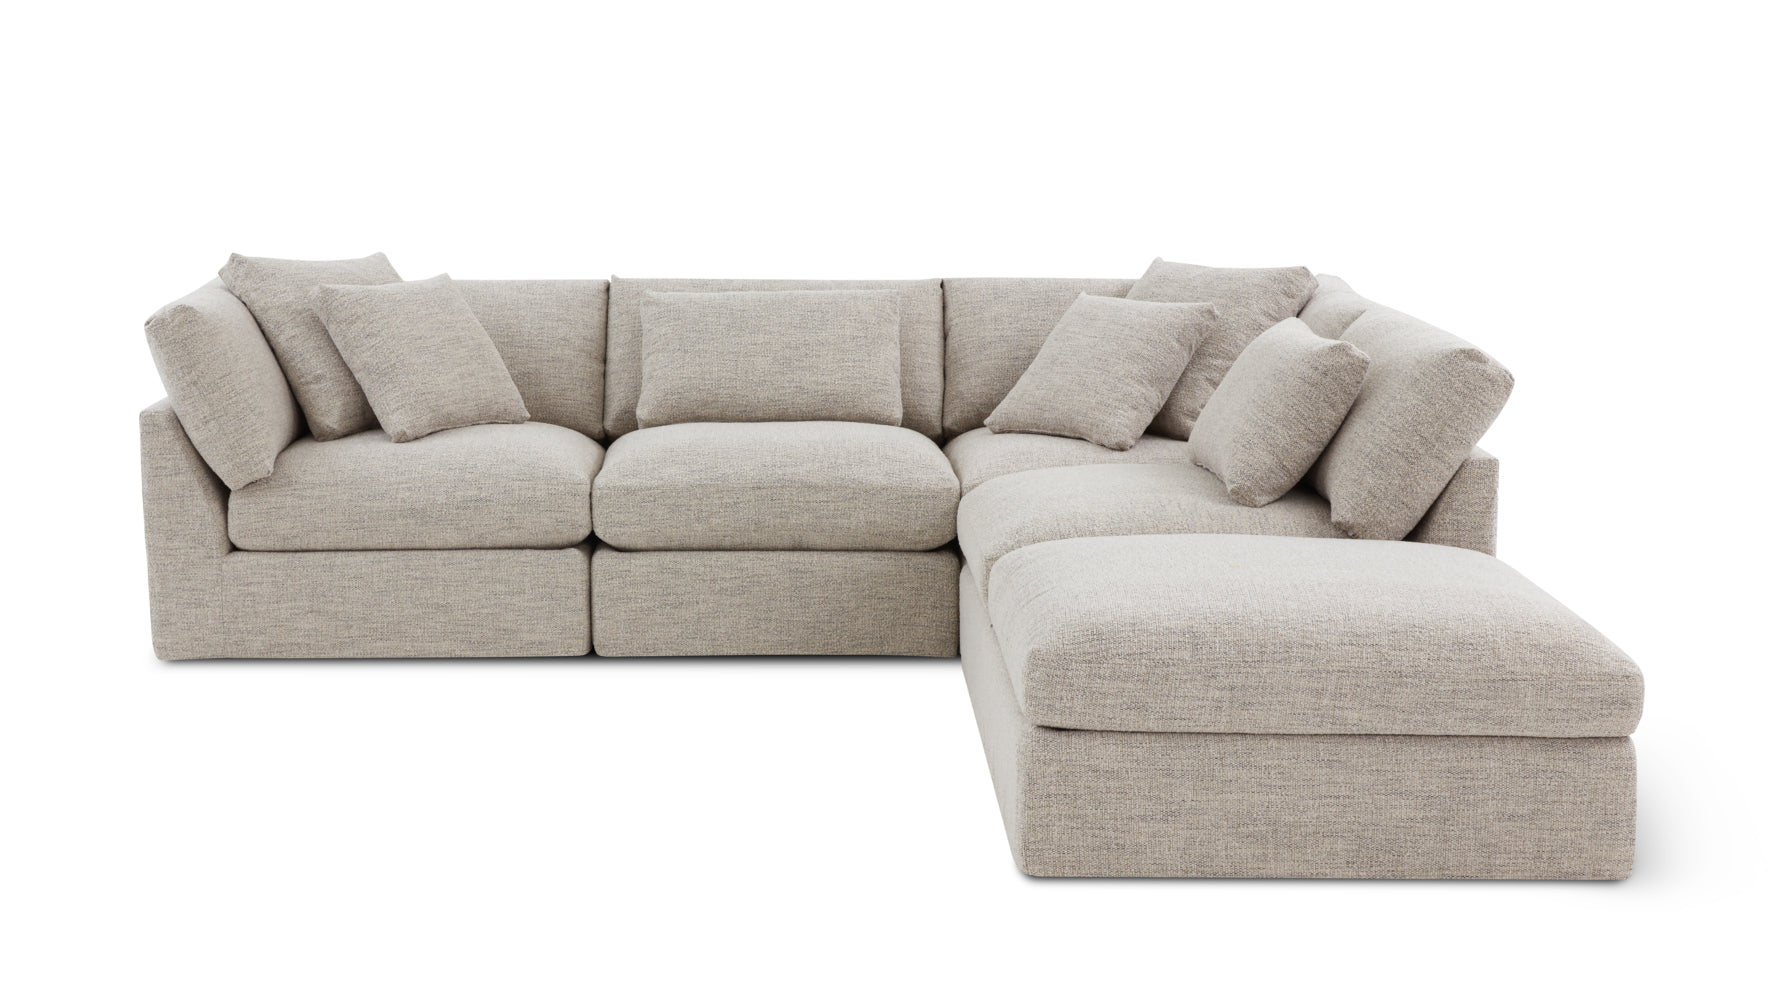 Get Together™ 5-Piece Modular Sectional, Large, Oatmeal - Image 1